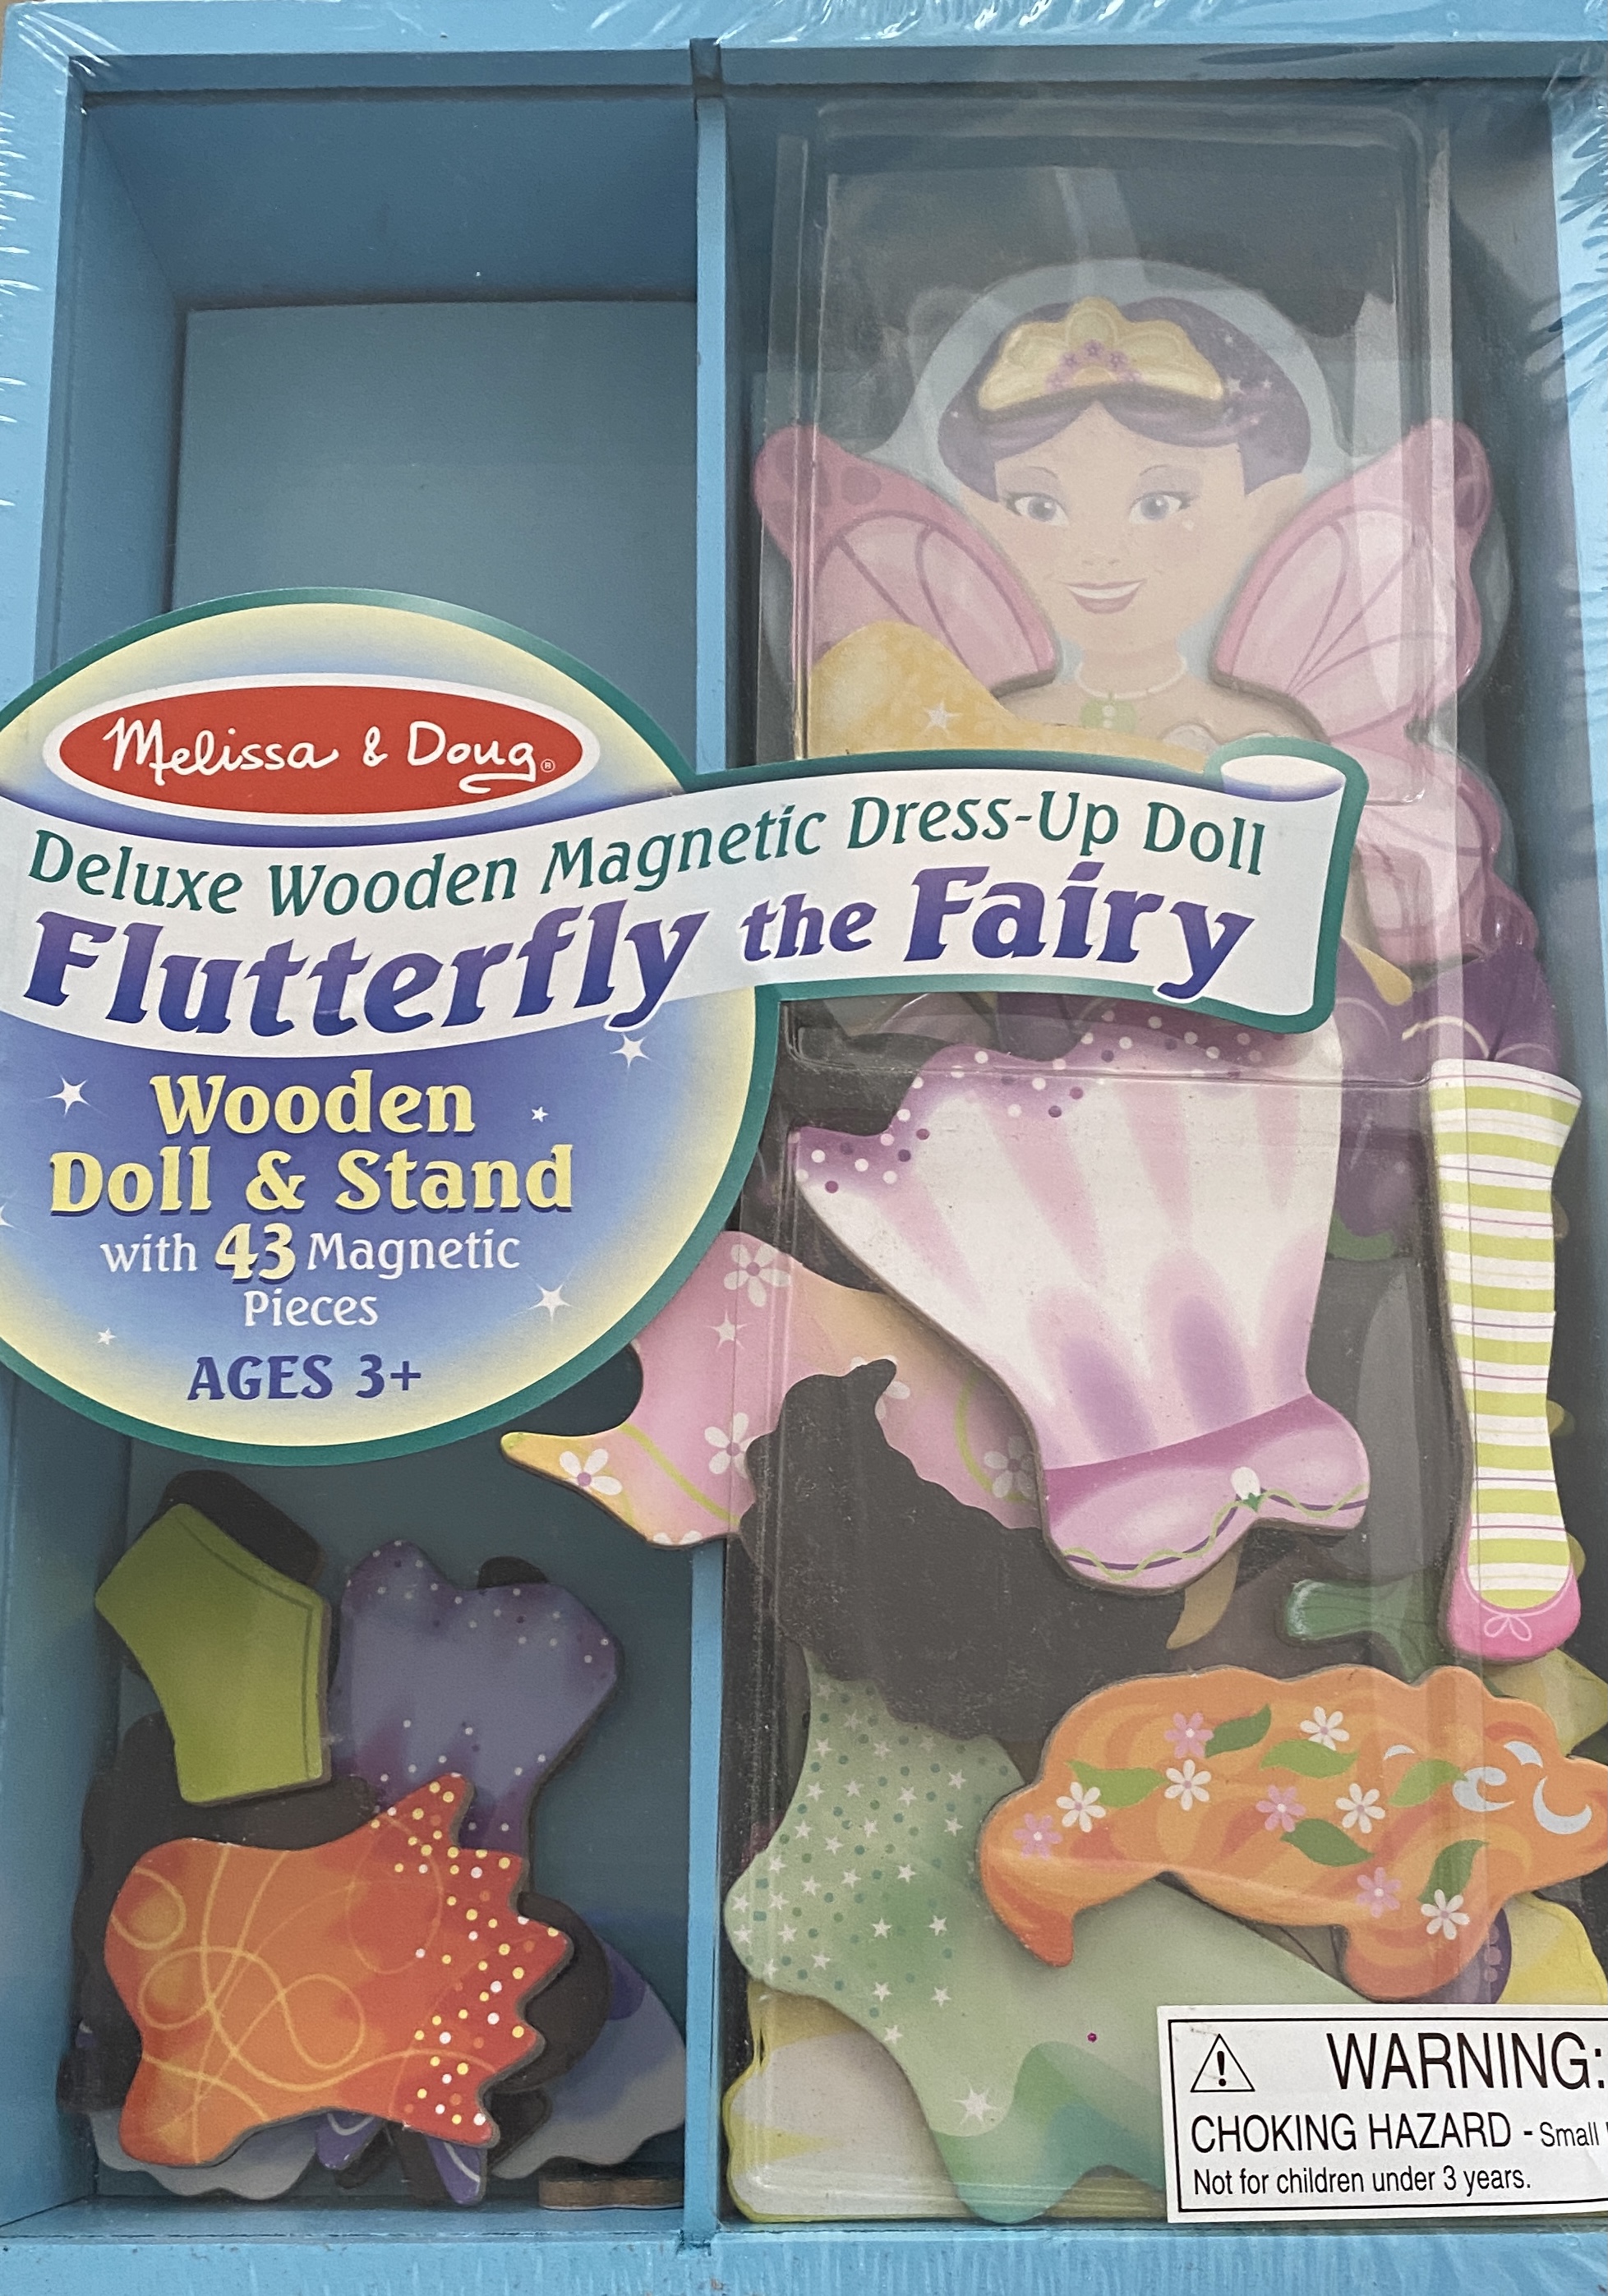 Melissa & Doug Deluxe Wooden Flutterfly the Fairy Magnetic Dress-Up Doll,  Ages 3 